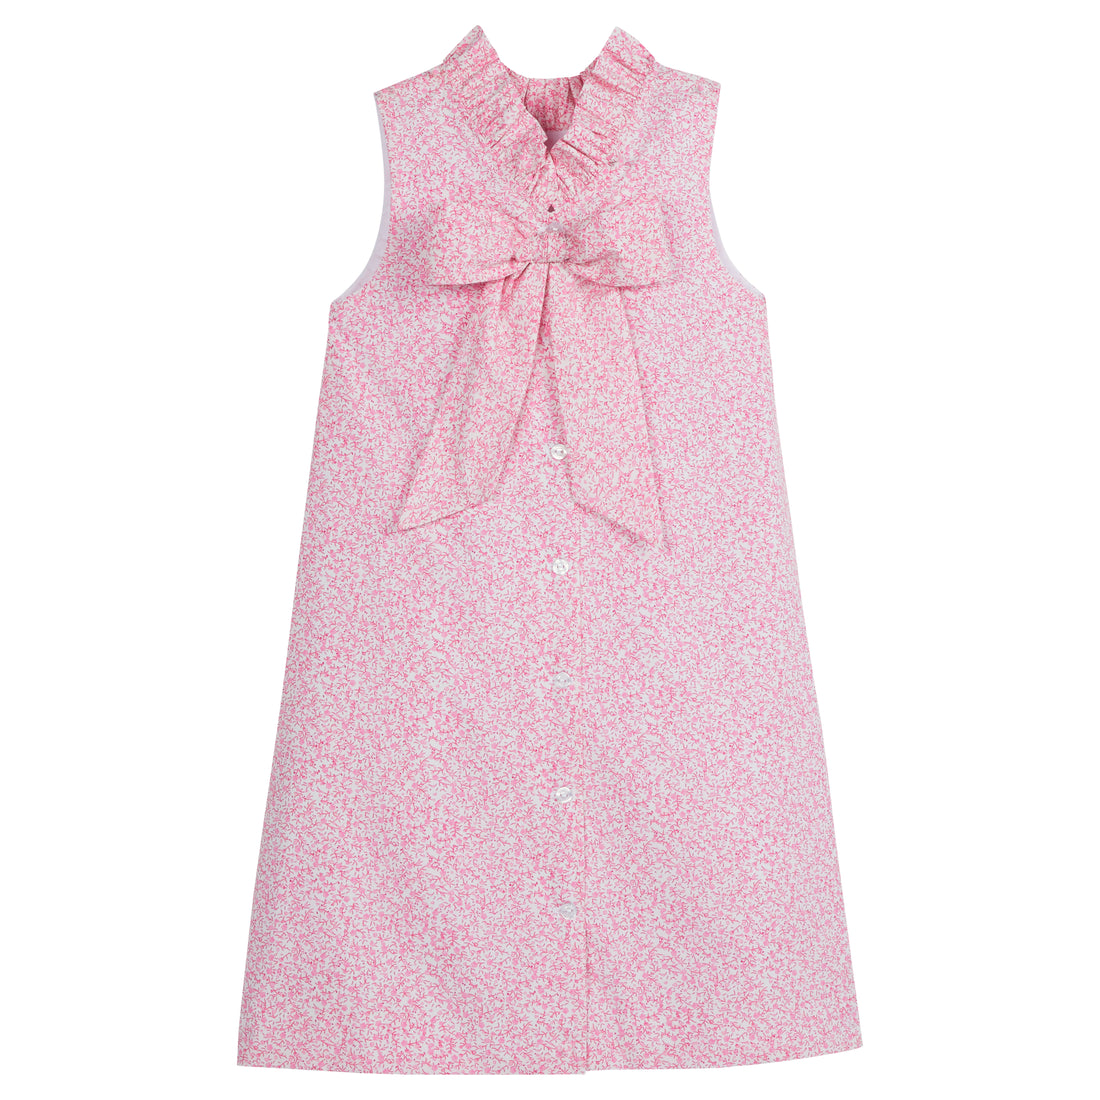 Little English classic knee length dress with pink floral pattern and bow in back, traditional girl&